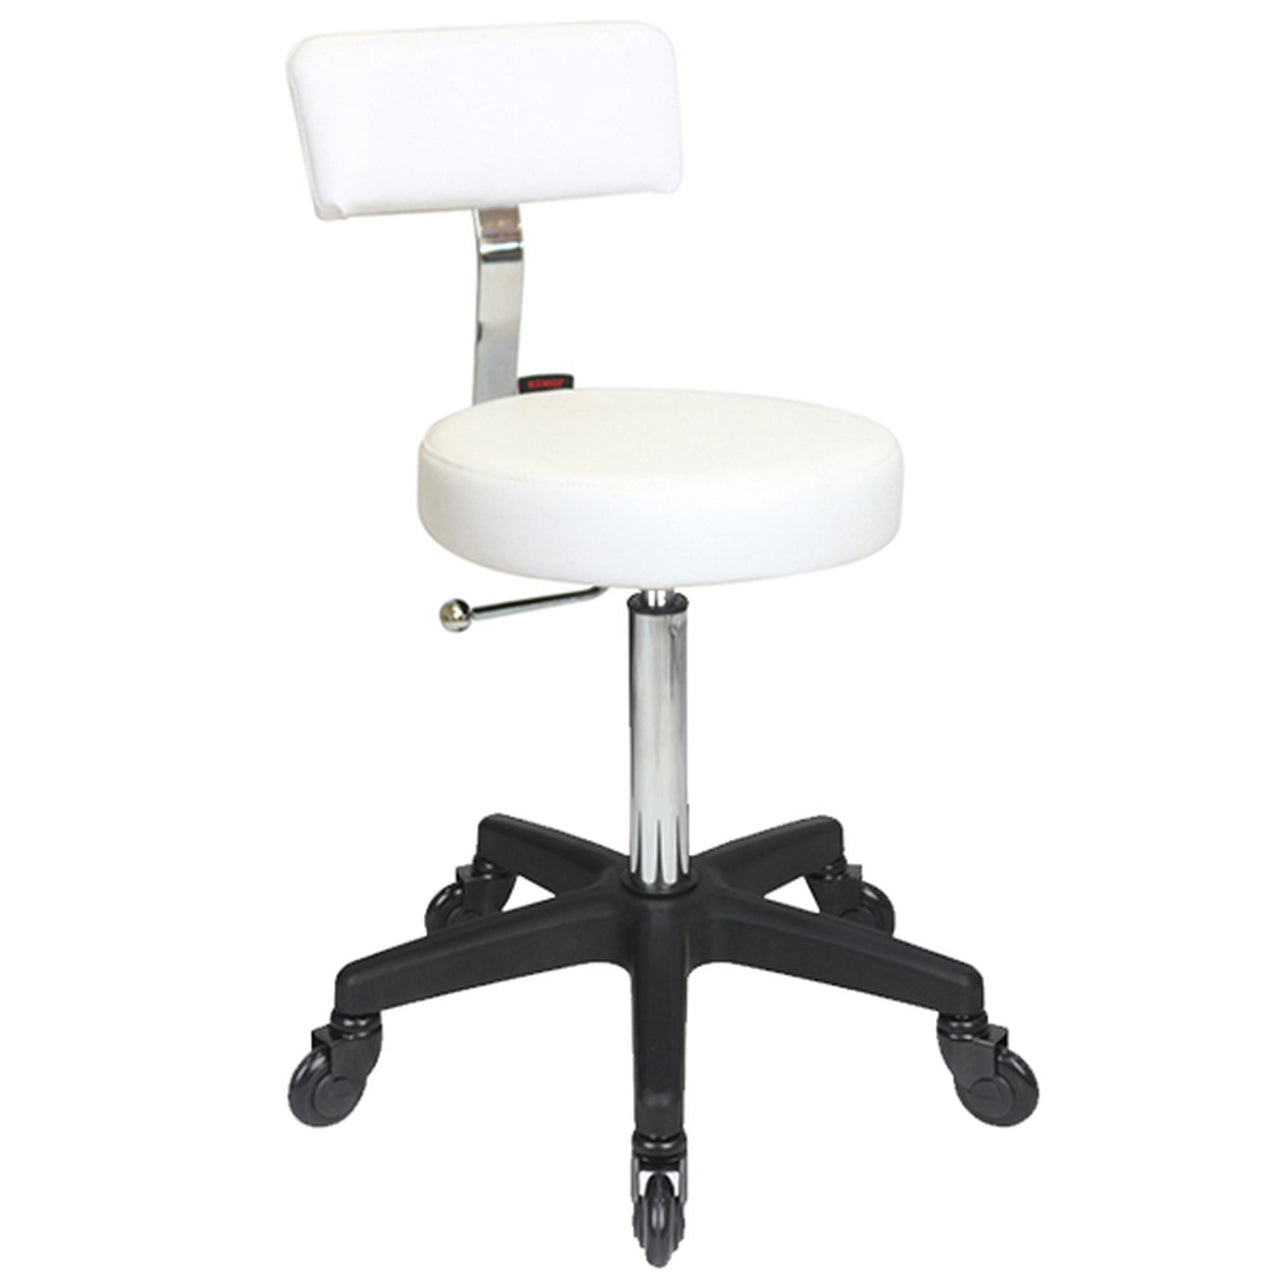 Sprint - Black Base - (White Upholstery) With CLICK'NCLEAN Castors